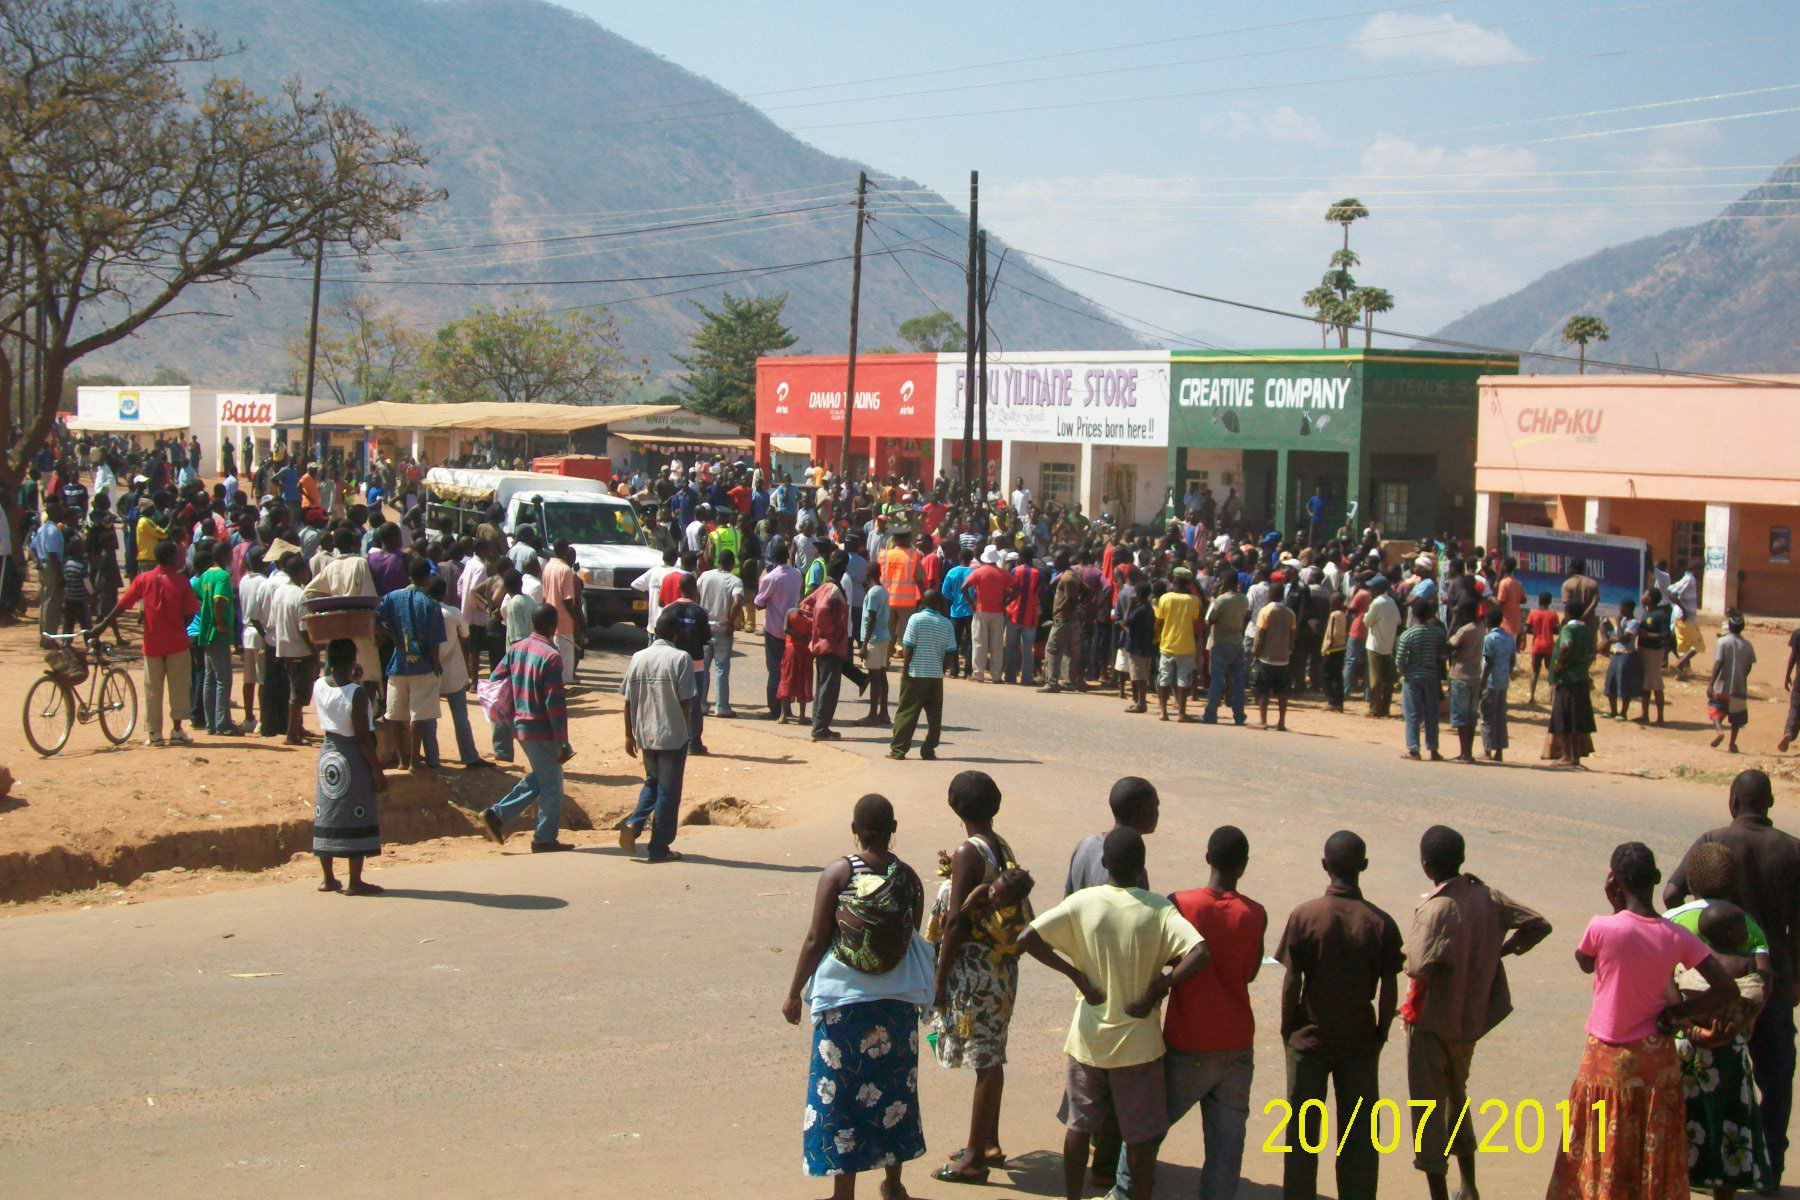 Emminent Arrests of Malawi Demonstration and Opposition Leaders in Malawi